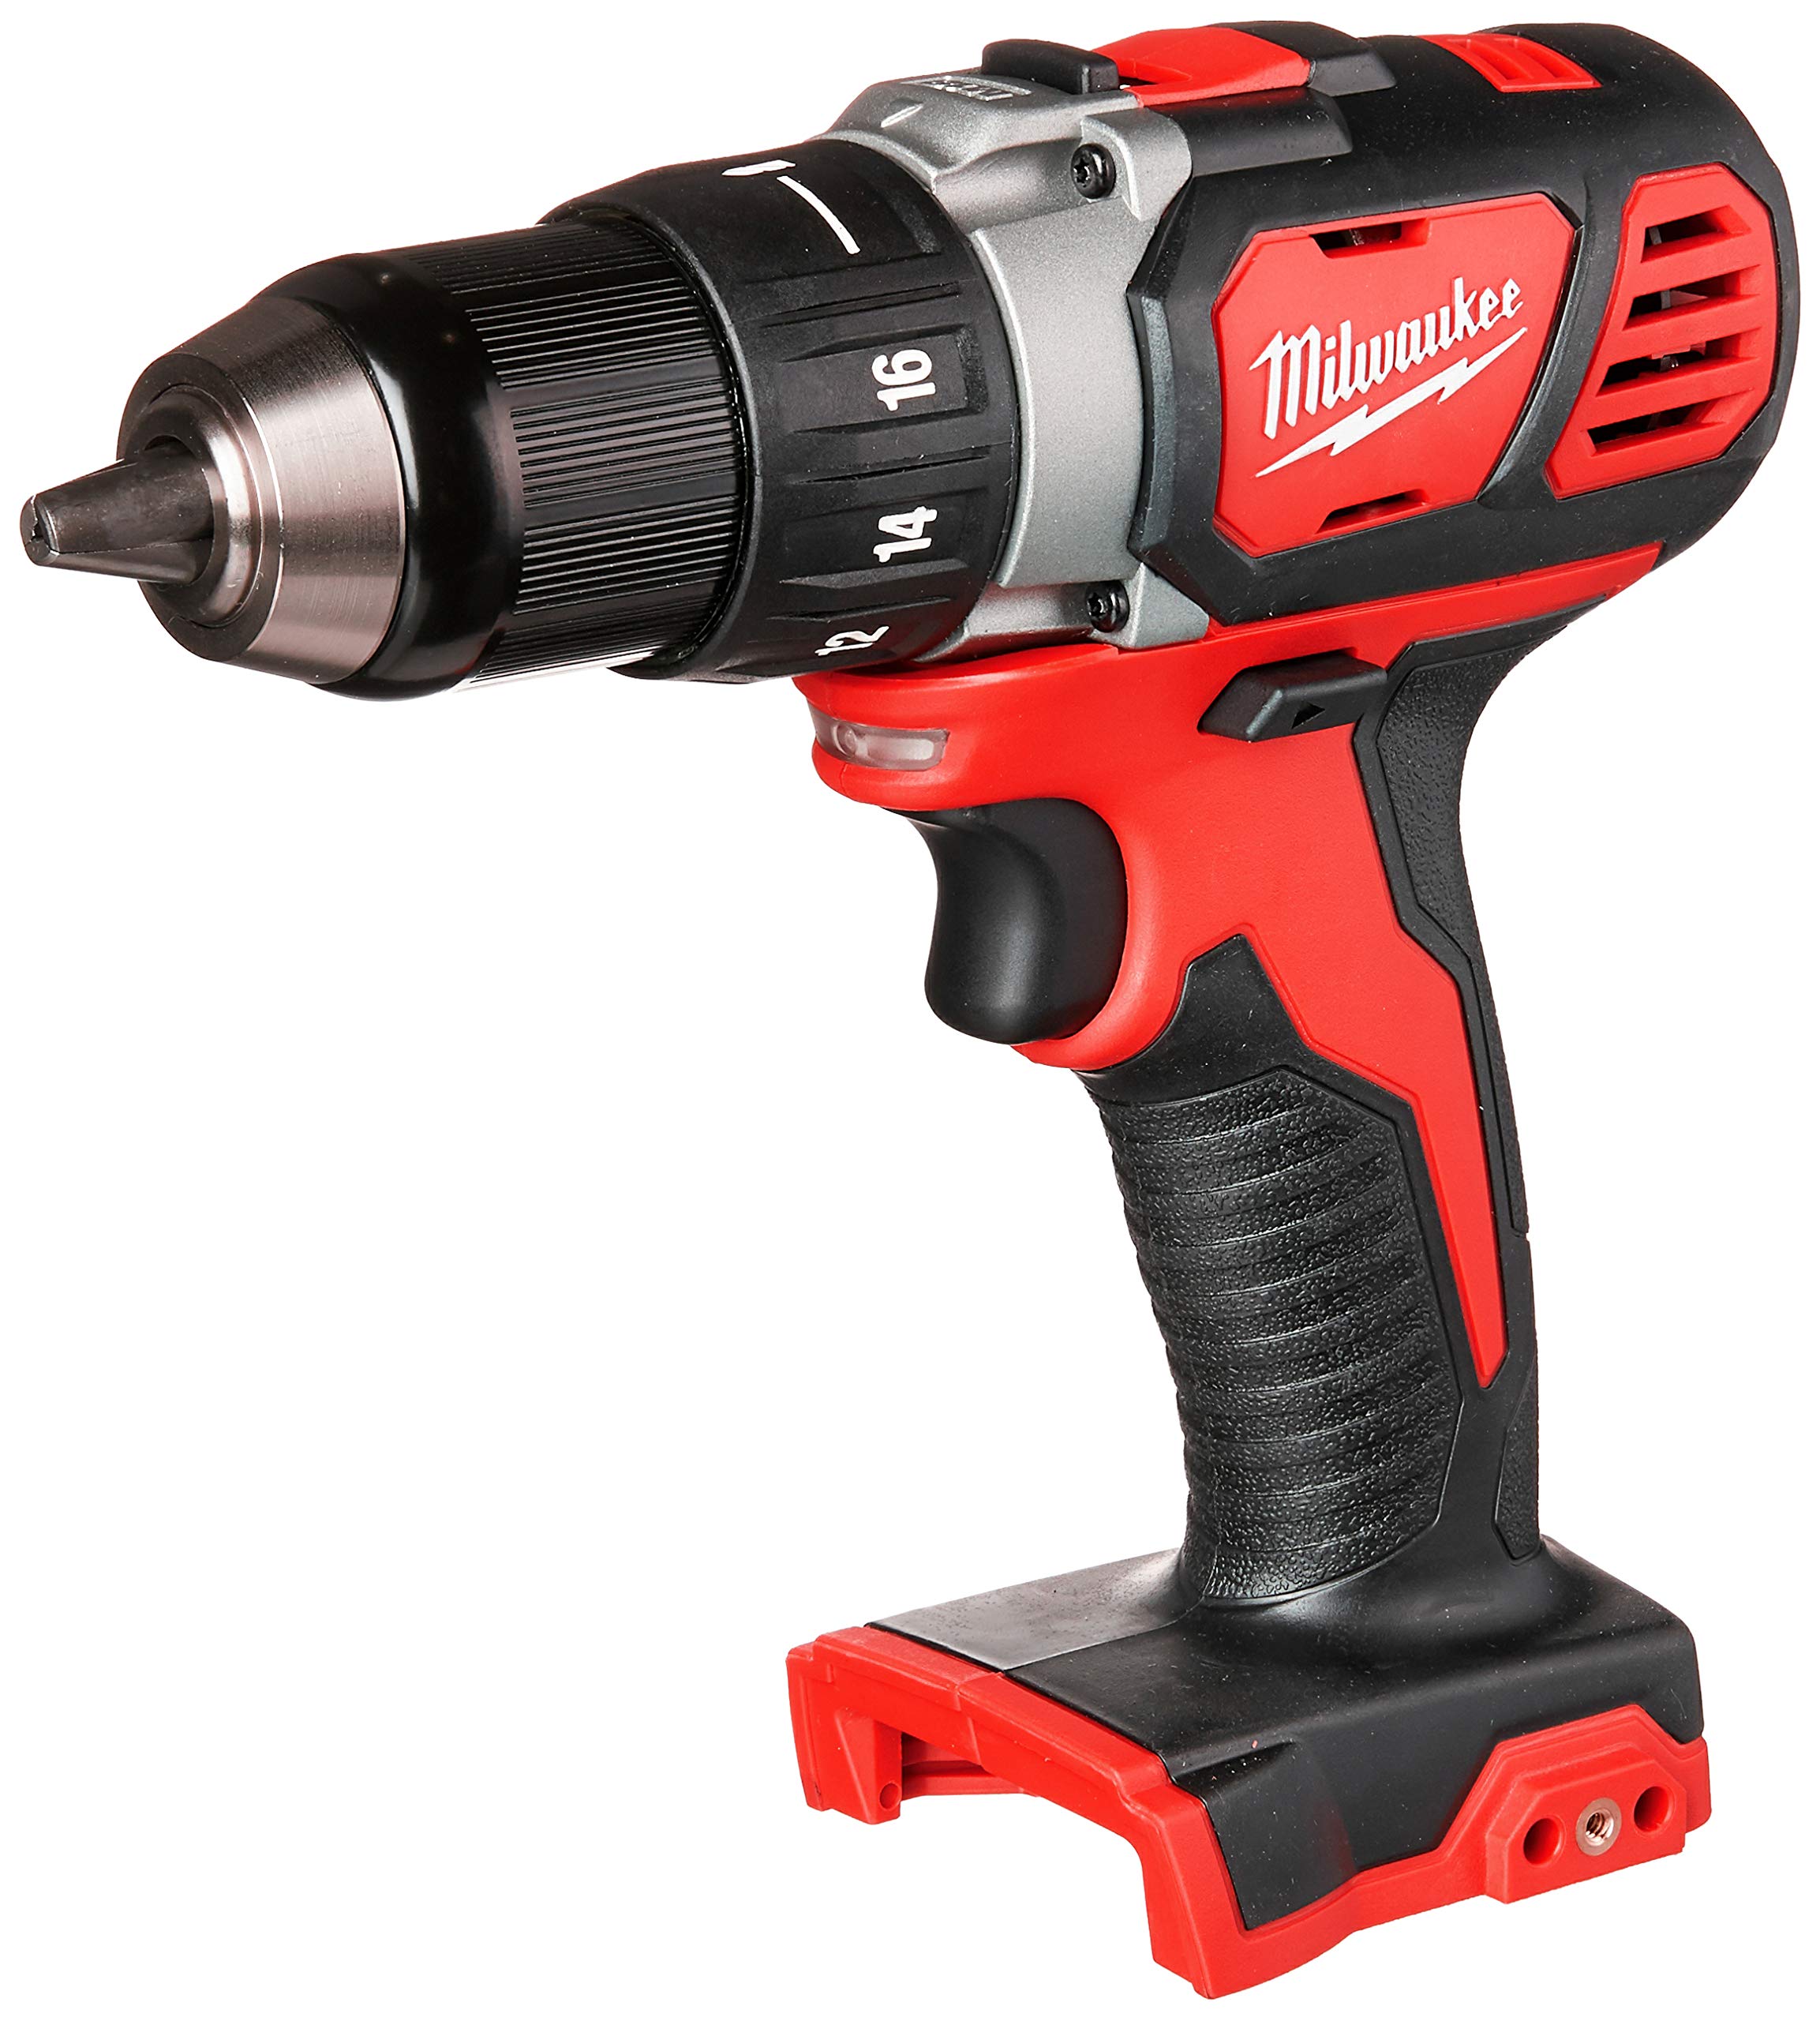 Milwaukee 2606-22CT M18 Cordless Drill/Driver Kit, 18 V, Red